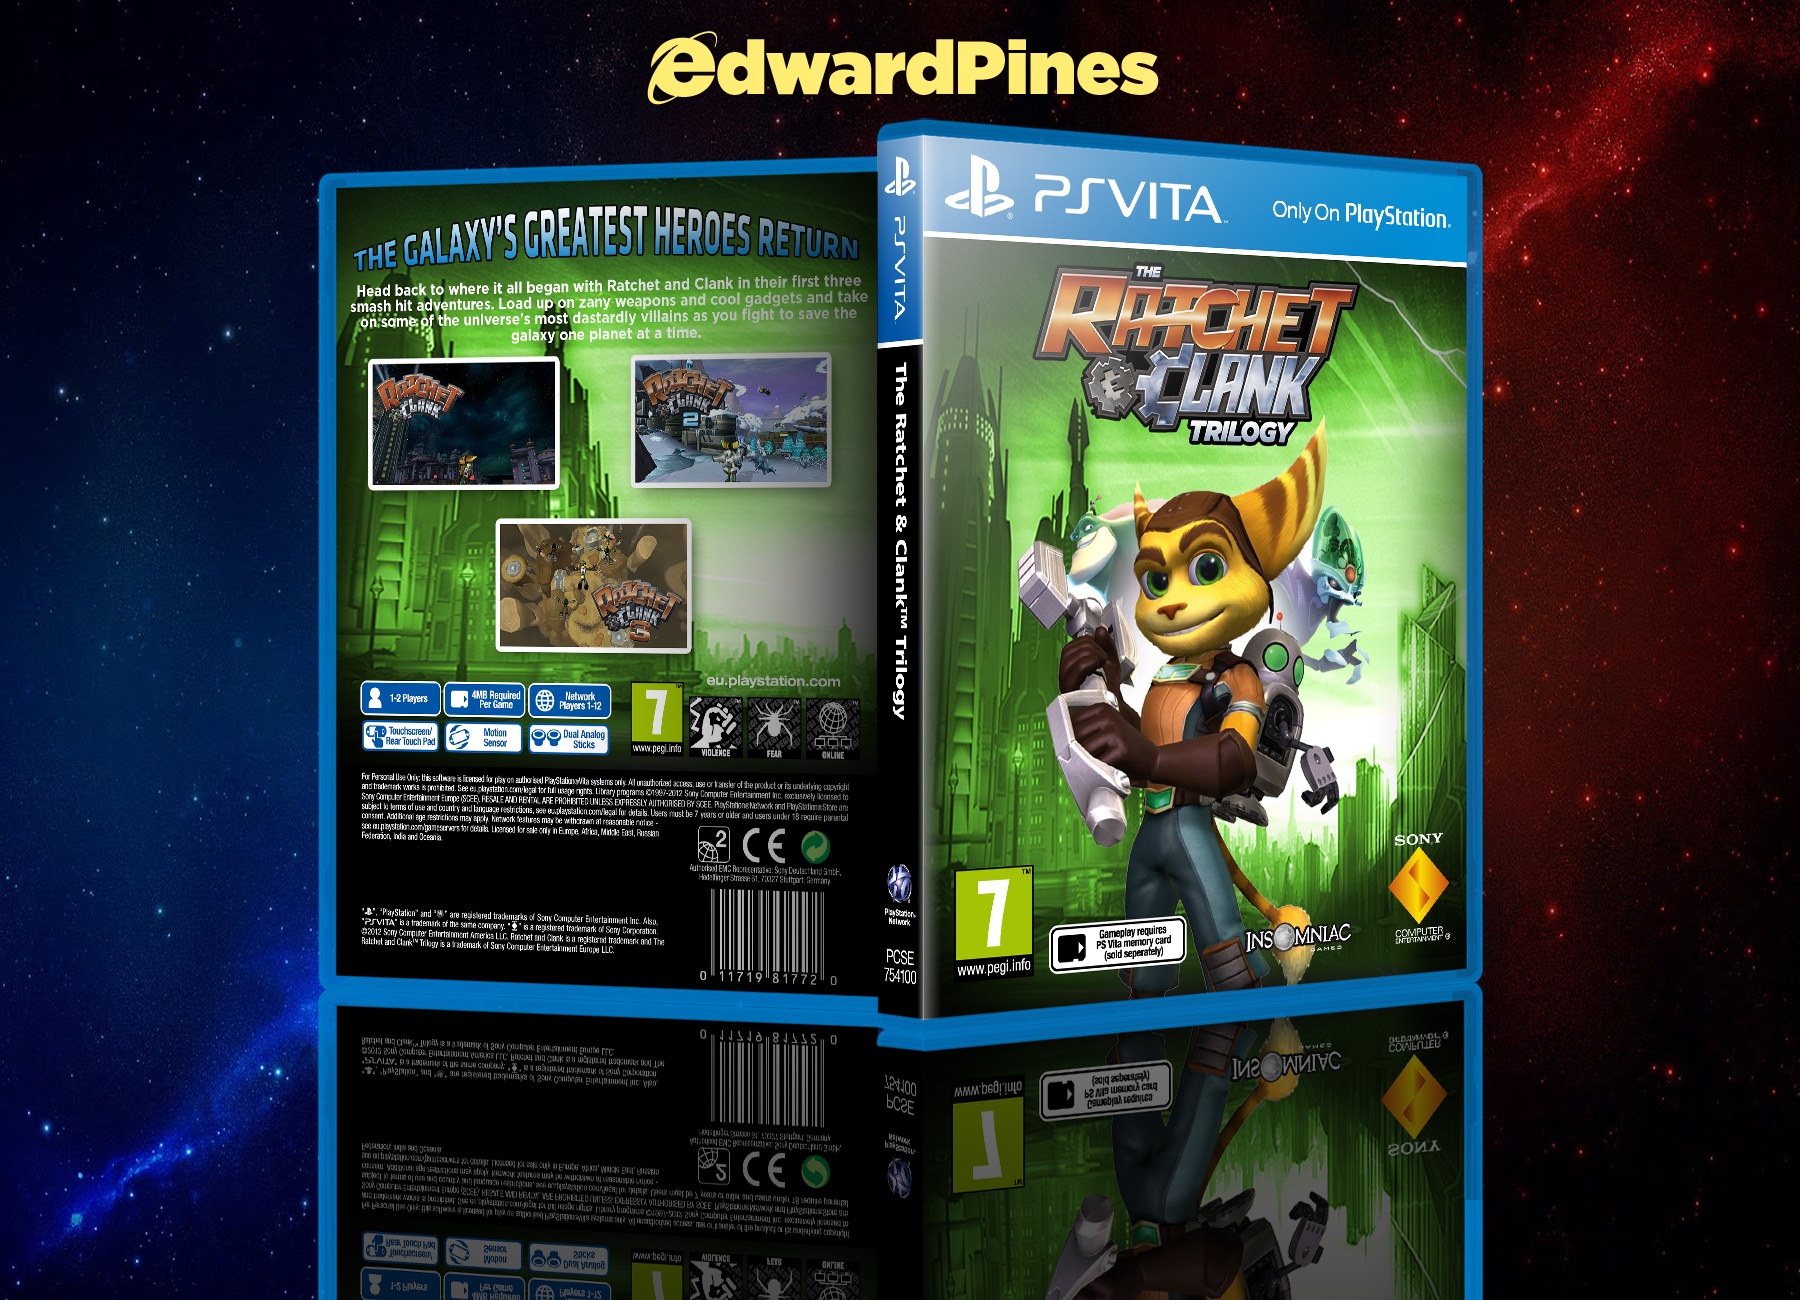 The Ratchet & Clank Trilogy box cover